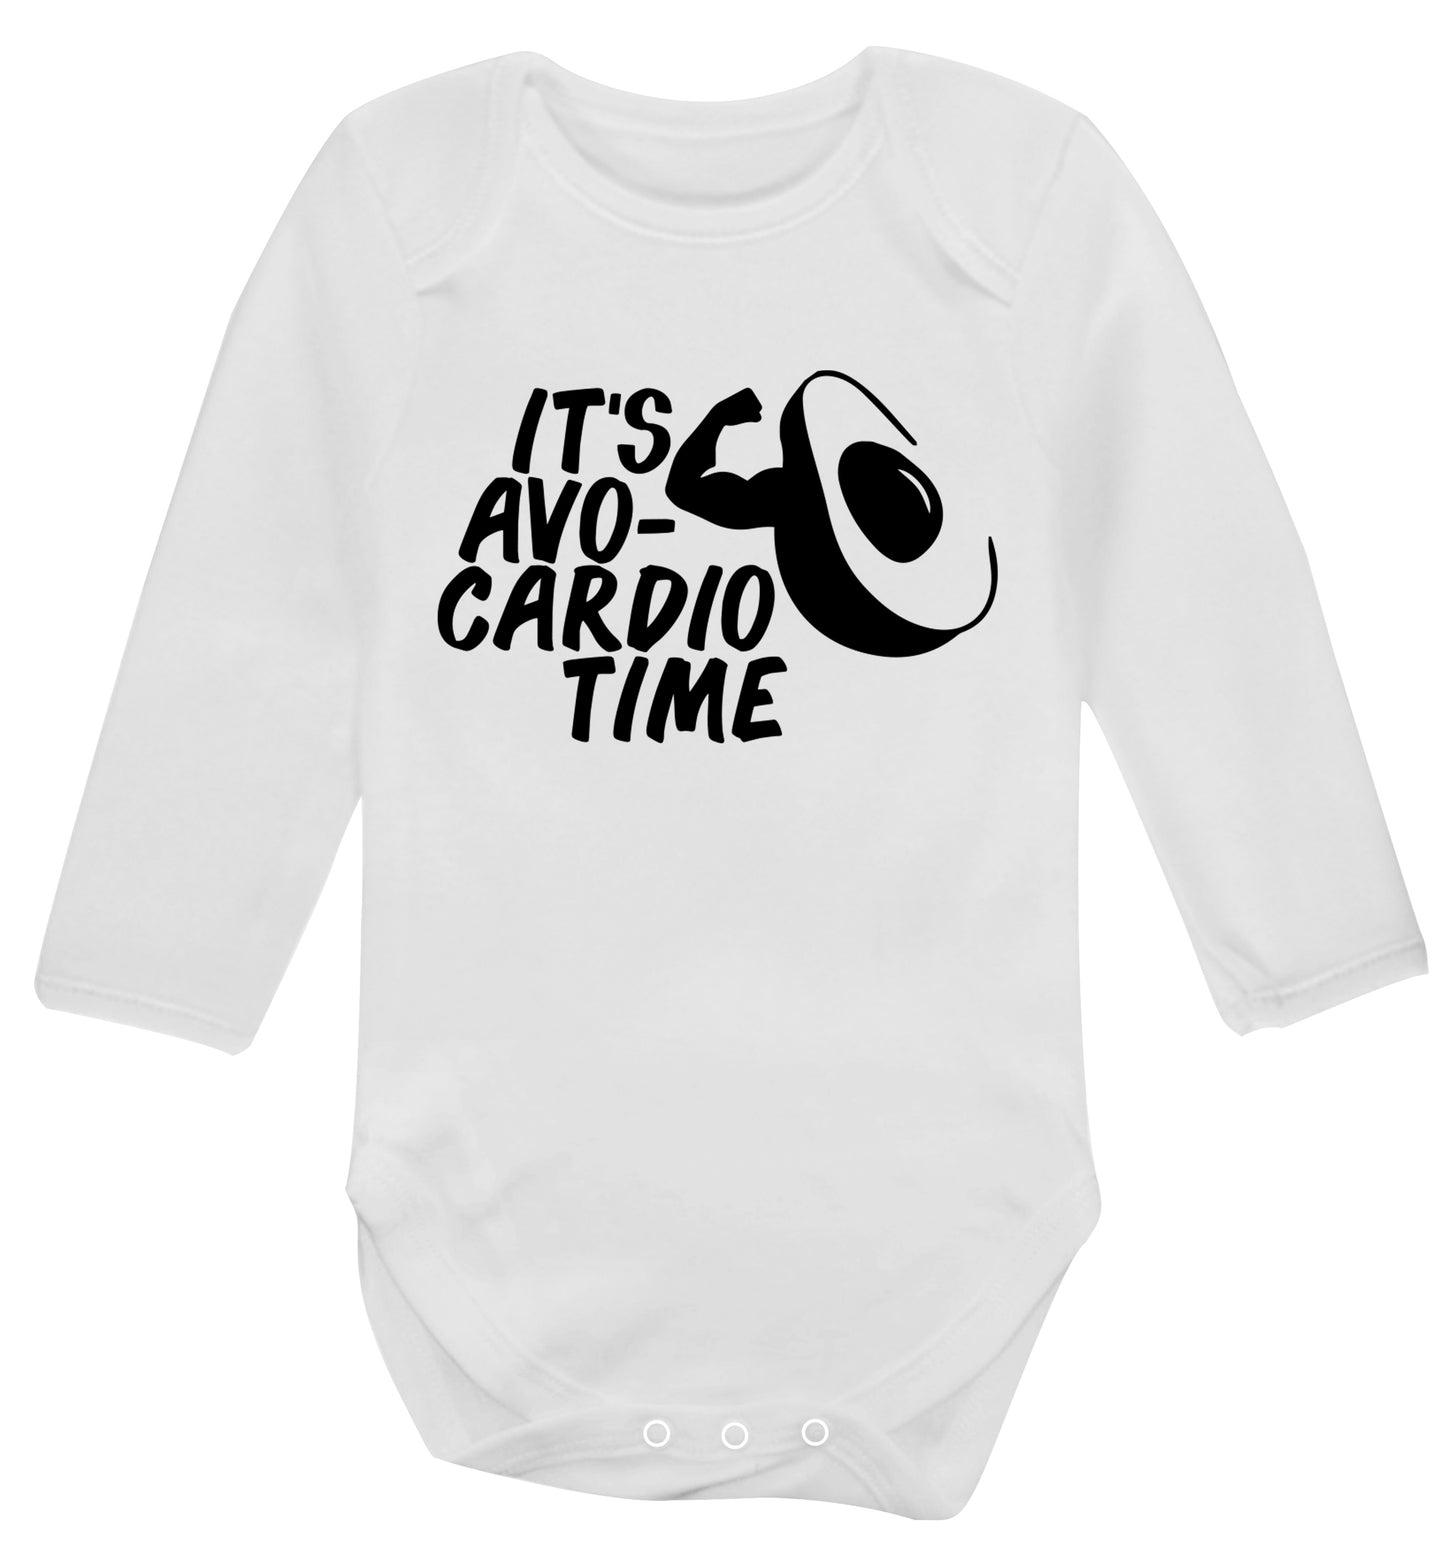 It's avo-cardio time Baby Vest long sleeved white 6-12 months